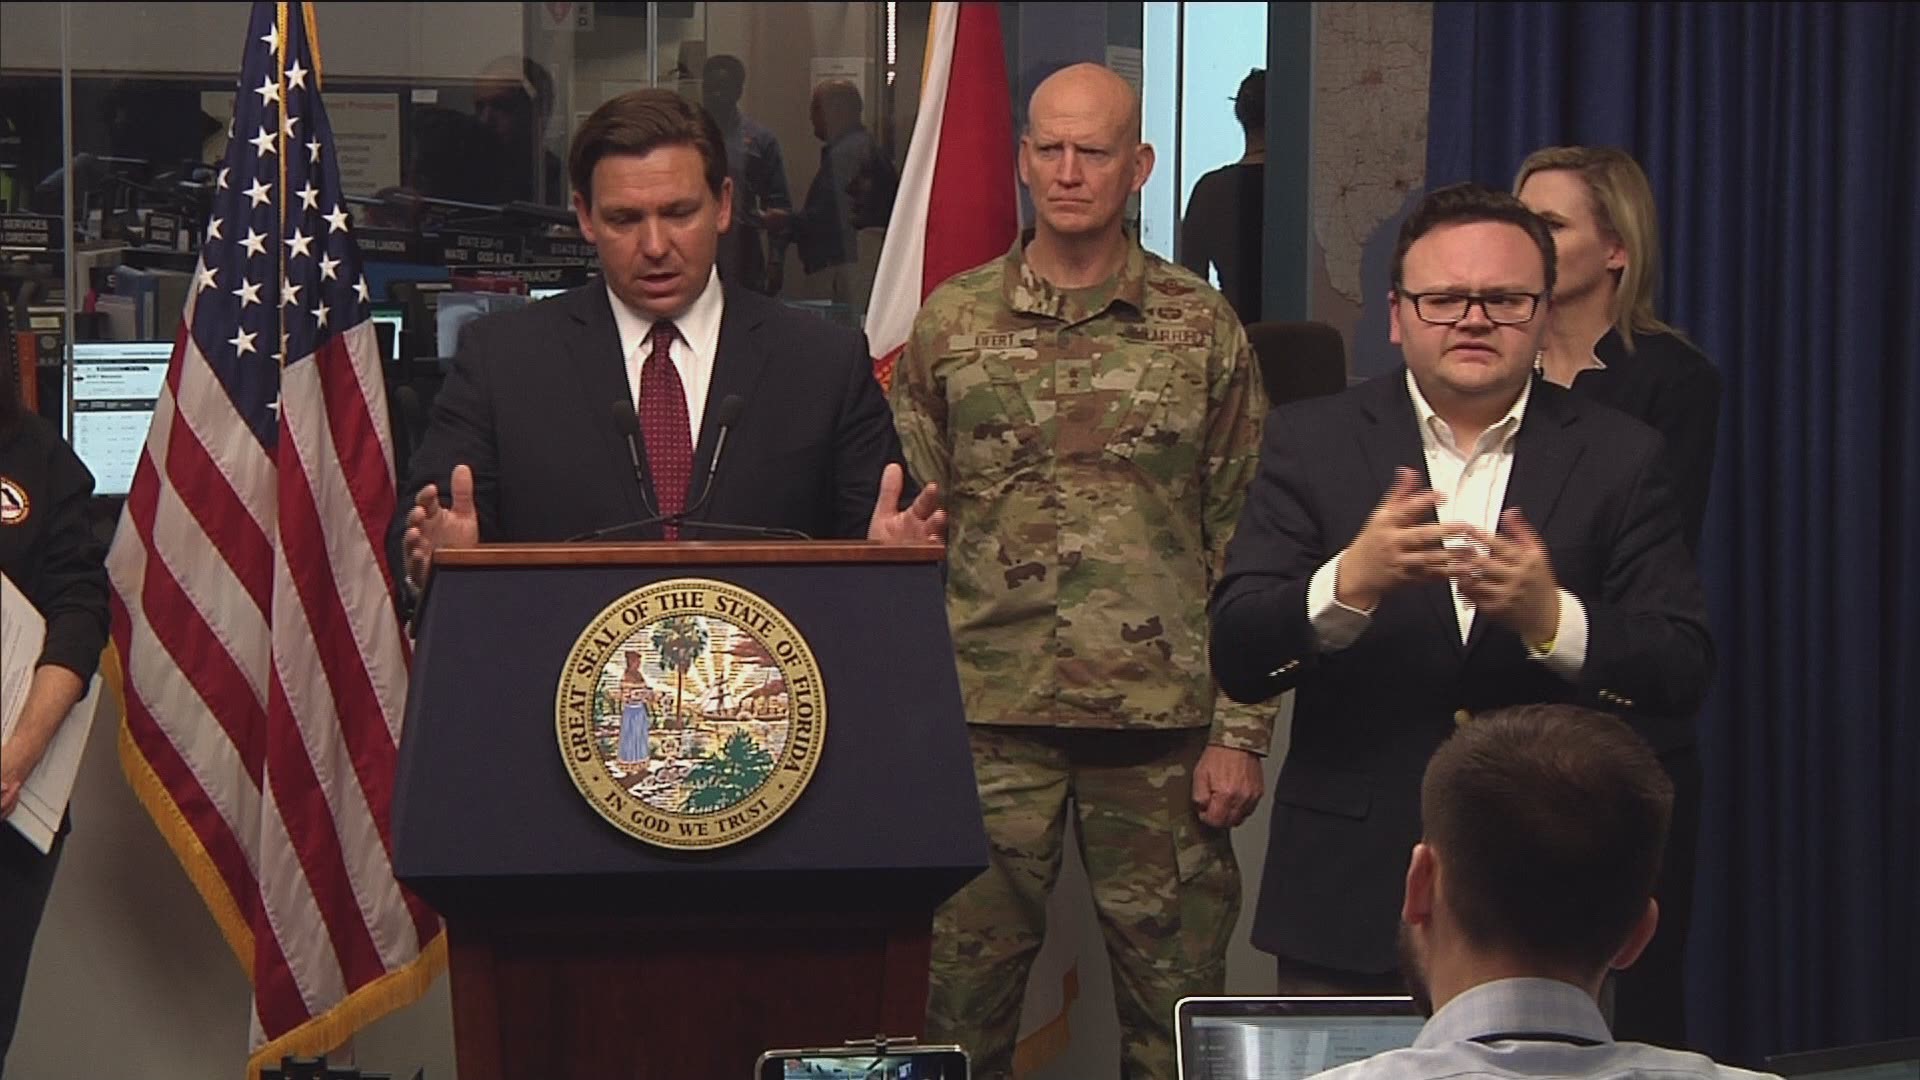 Gov. Ron DeSantis gave the state's latest efforts to combat the spread of the coronavirus, as well as efforts to help those affected by being out of work.